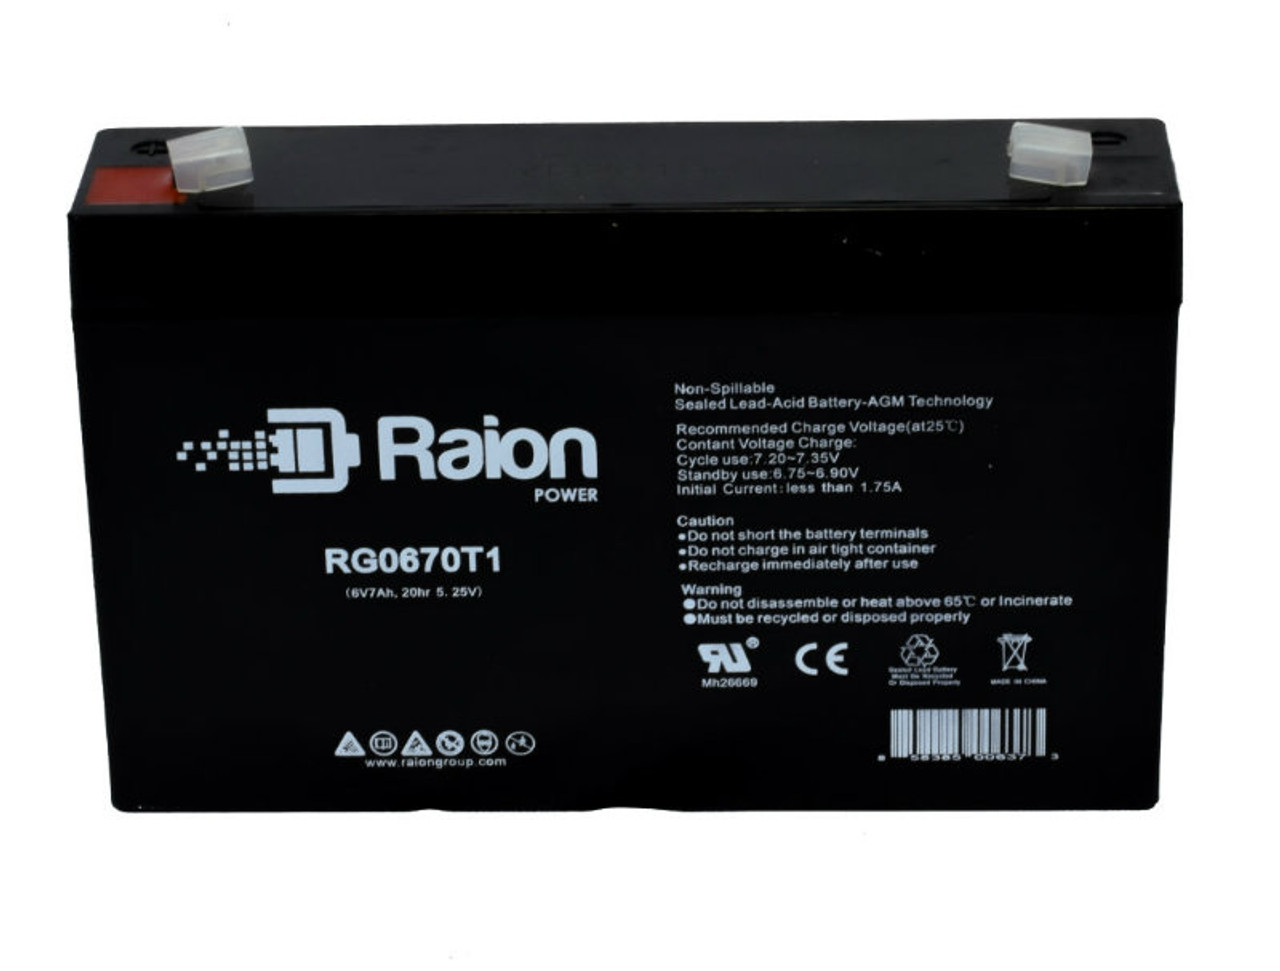 Raion Power RG0670T1 Replacement Battery Cartridge for IMED 1310 Pump/Controller